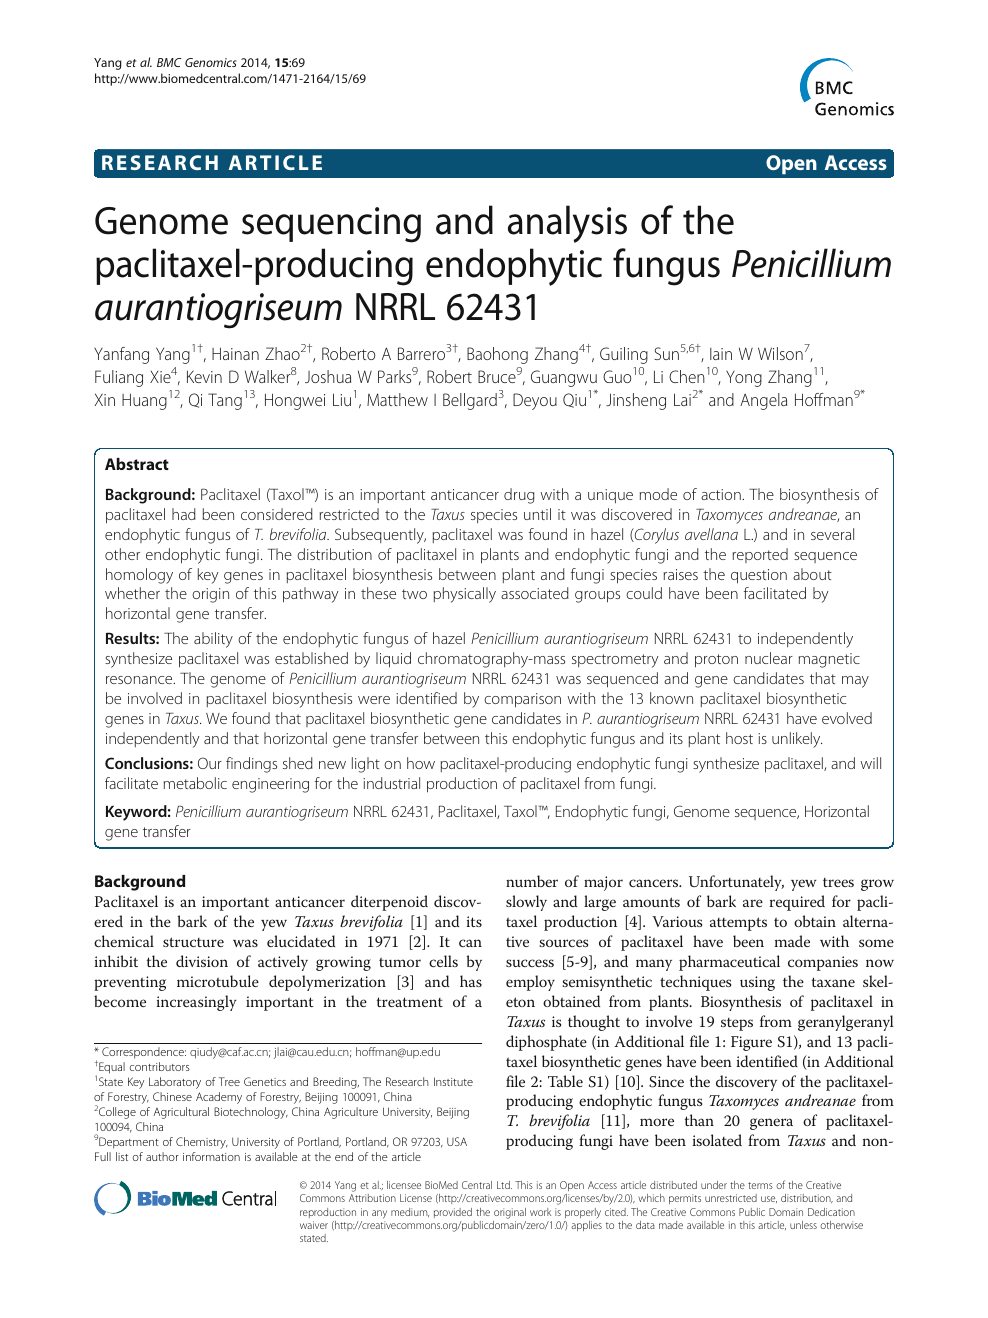 Genome S!   equencing And Analysis Of The Paclitaxel Producing - read paper